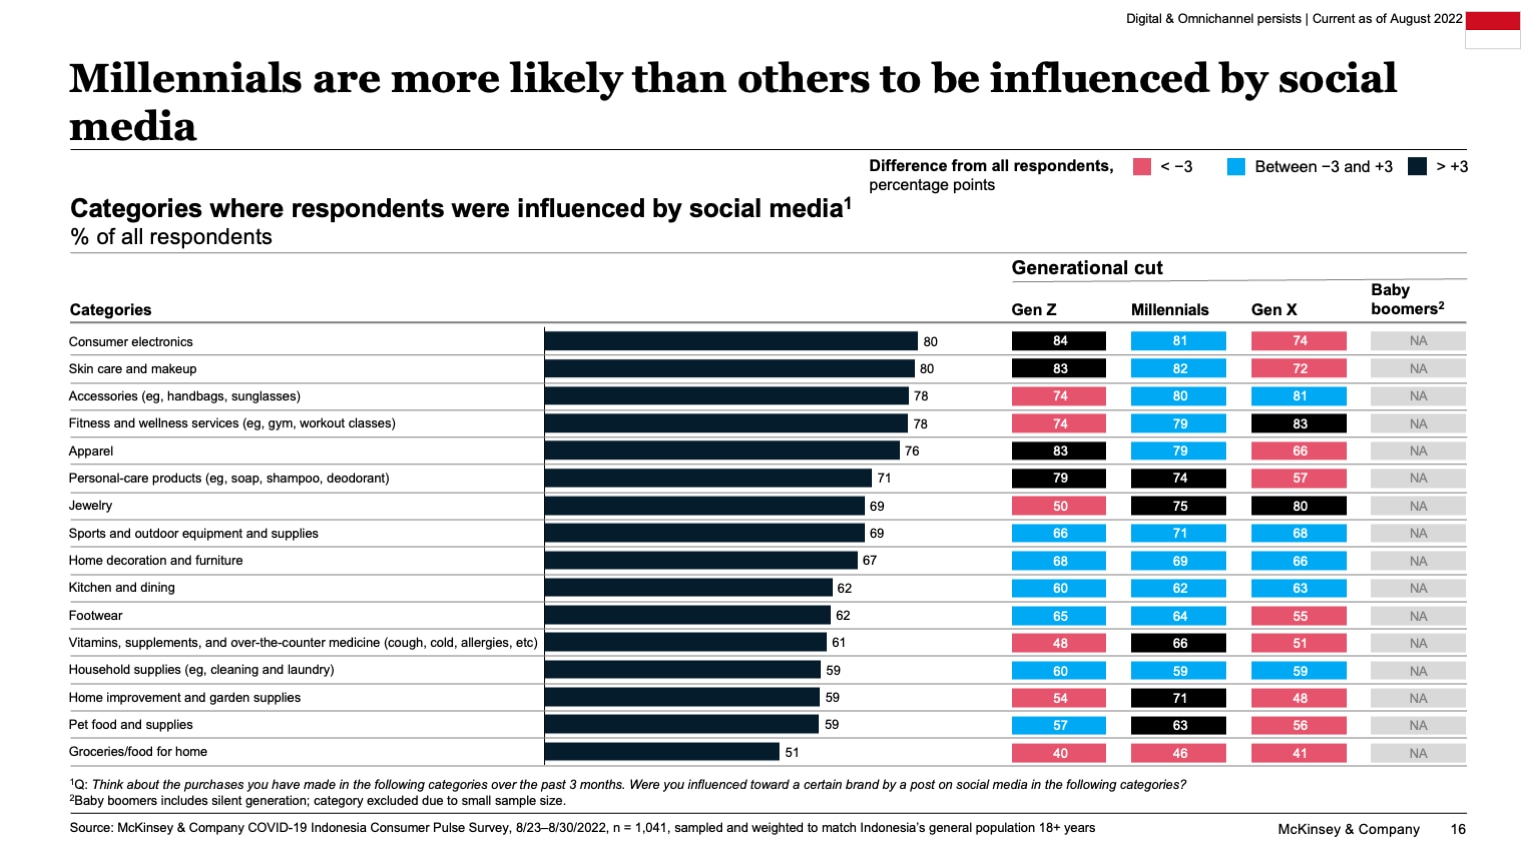 Millennials are more likely than others to be influenced by social media